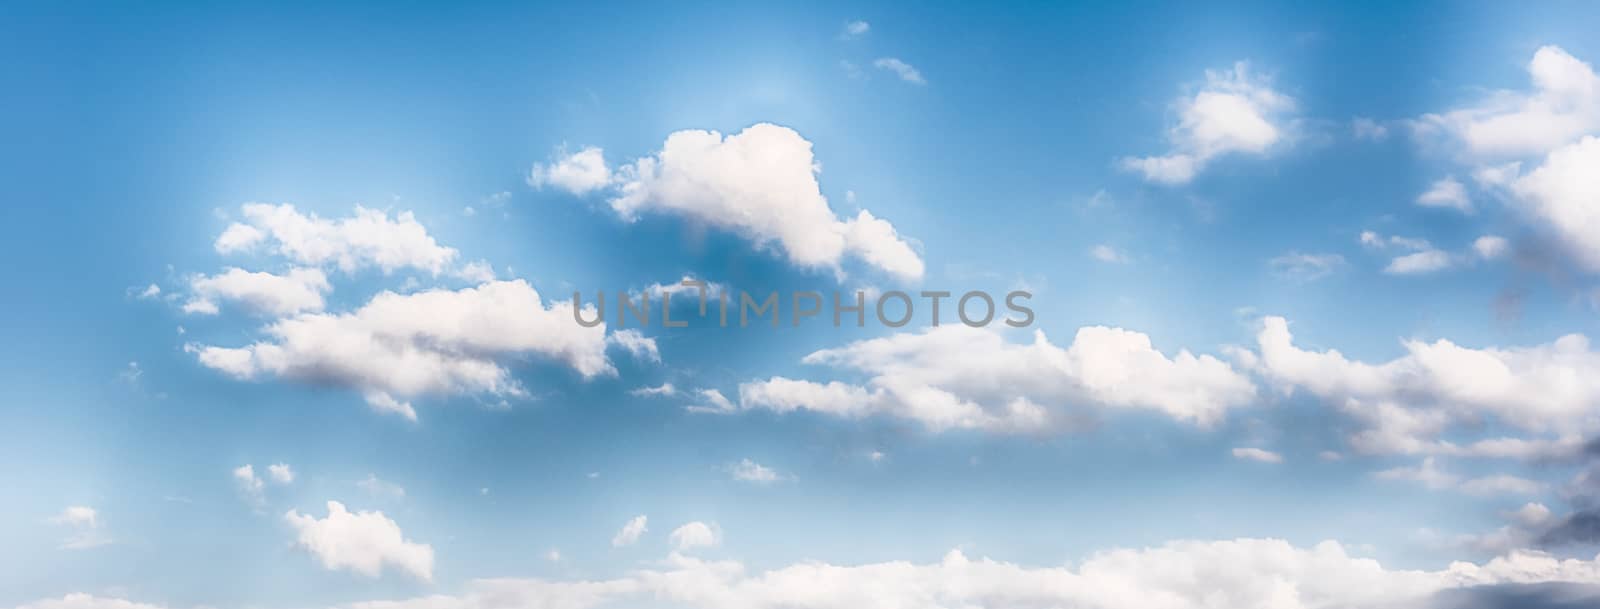 Blue sky with scenic clouds texture, useful as background by marcorubino